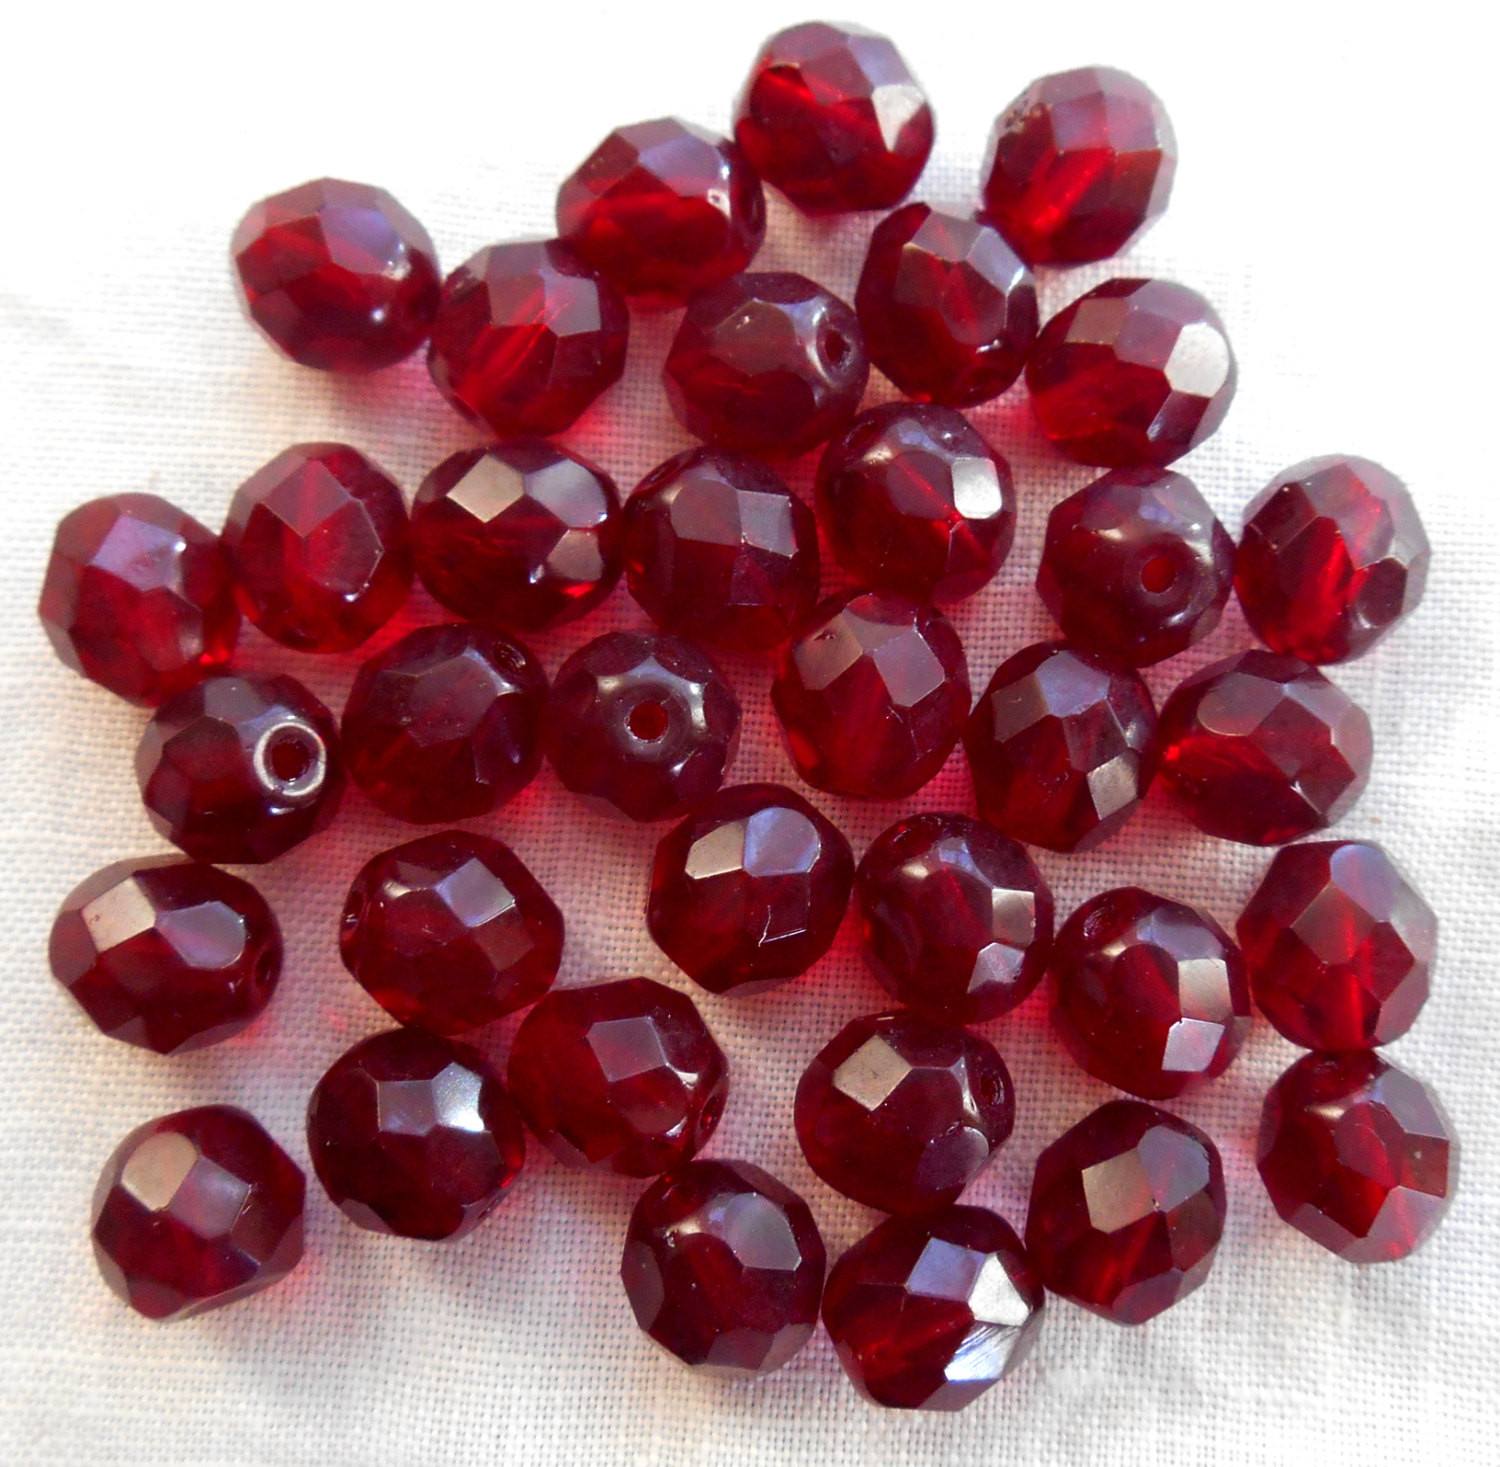 *50* 4mm Gemtone Picasso Fire Polished Round Beads, Women's, Red